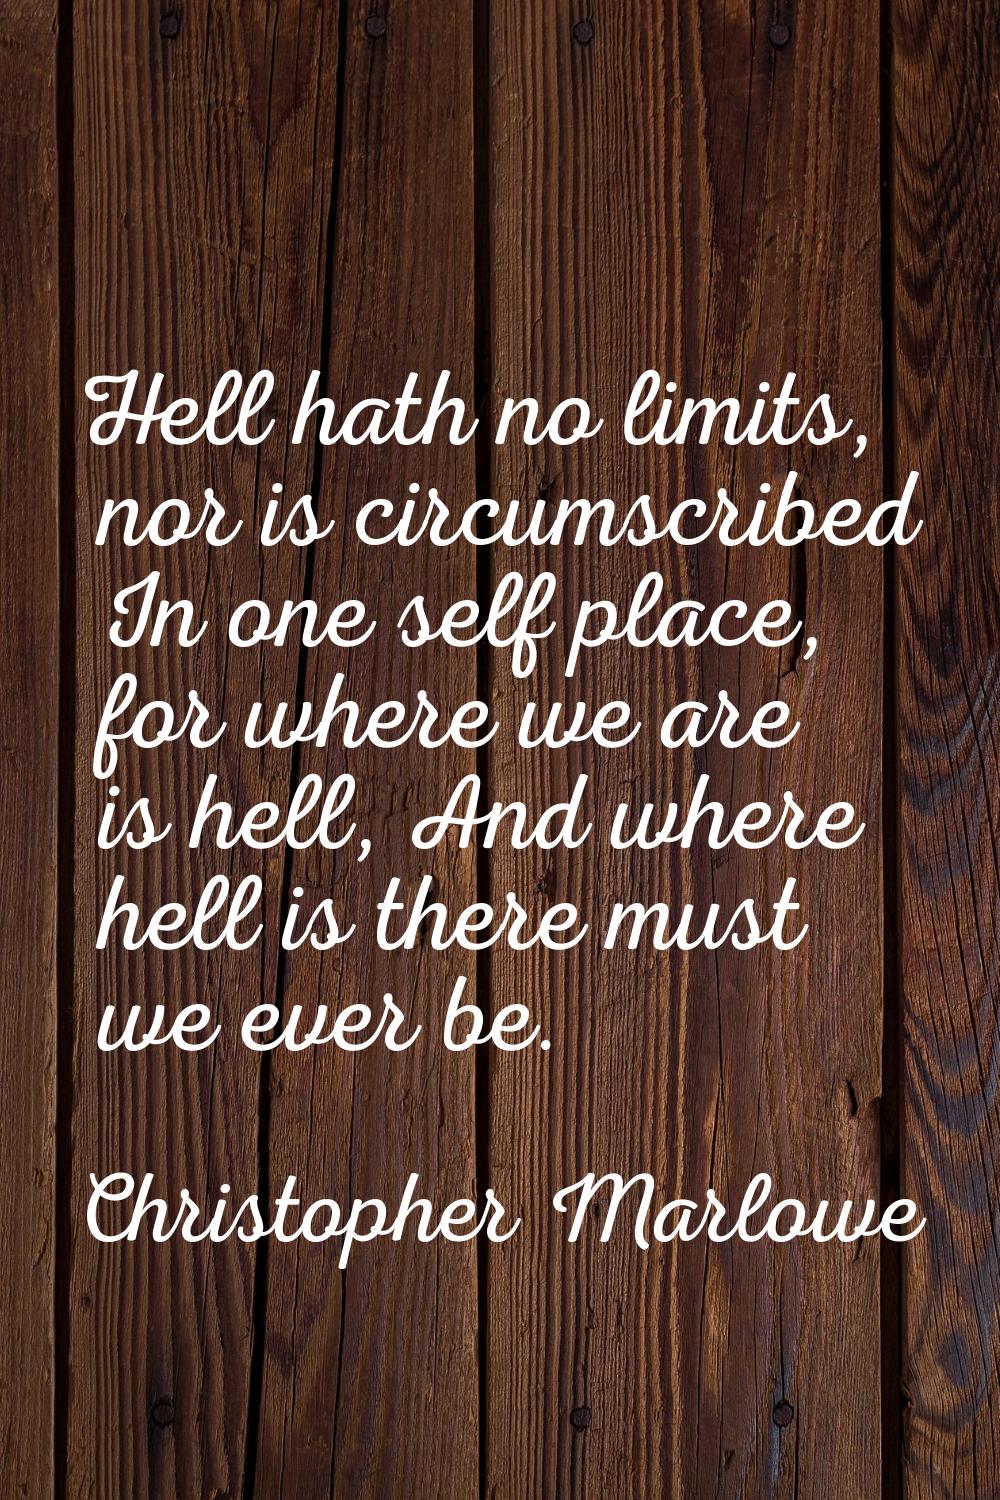 Hell hath no limits, nor is circumscribed In one self place, for where we are is hell, And where he